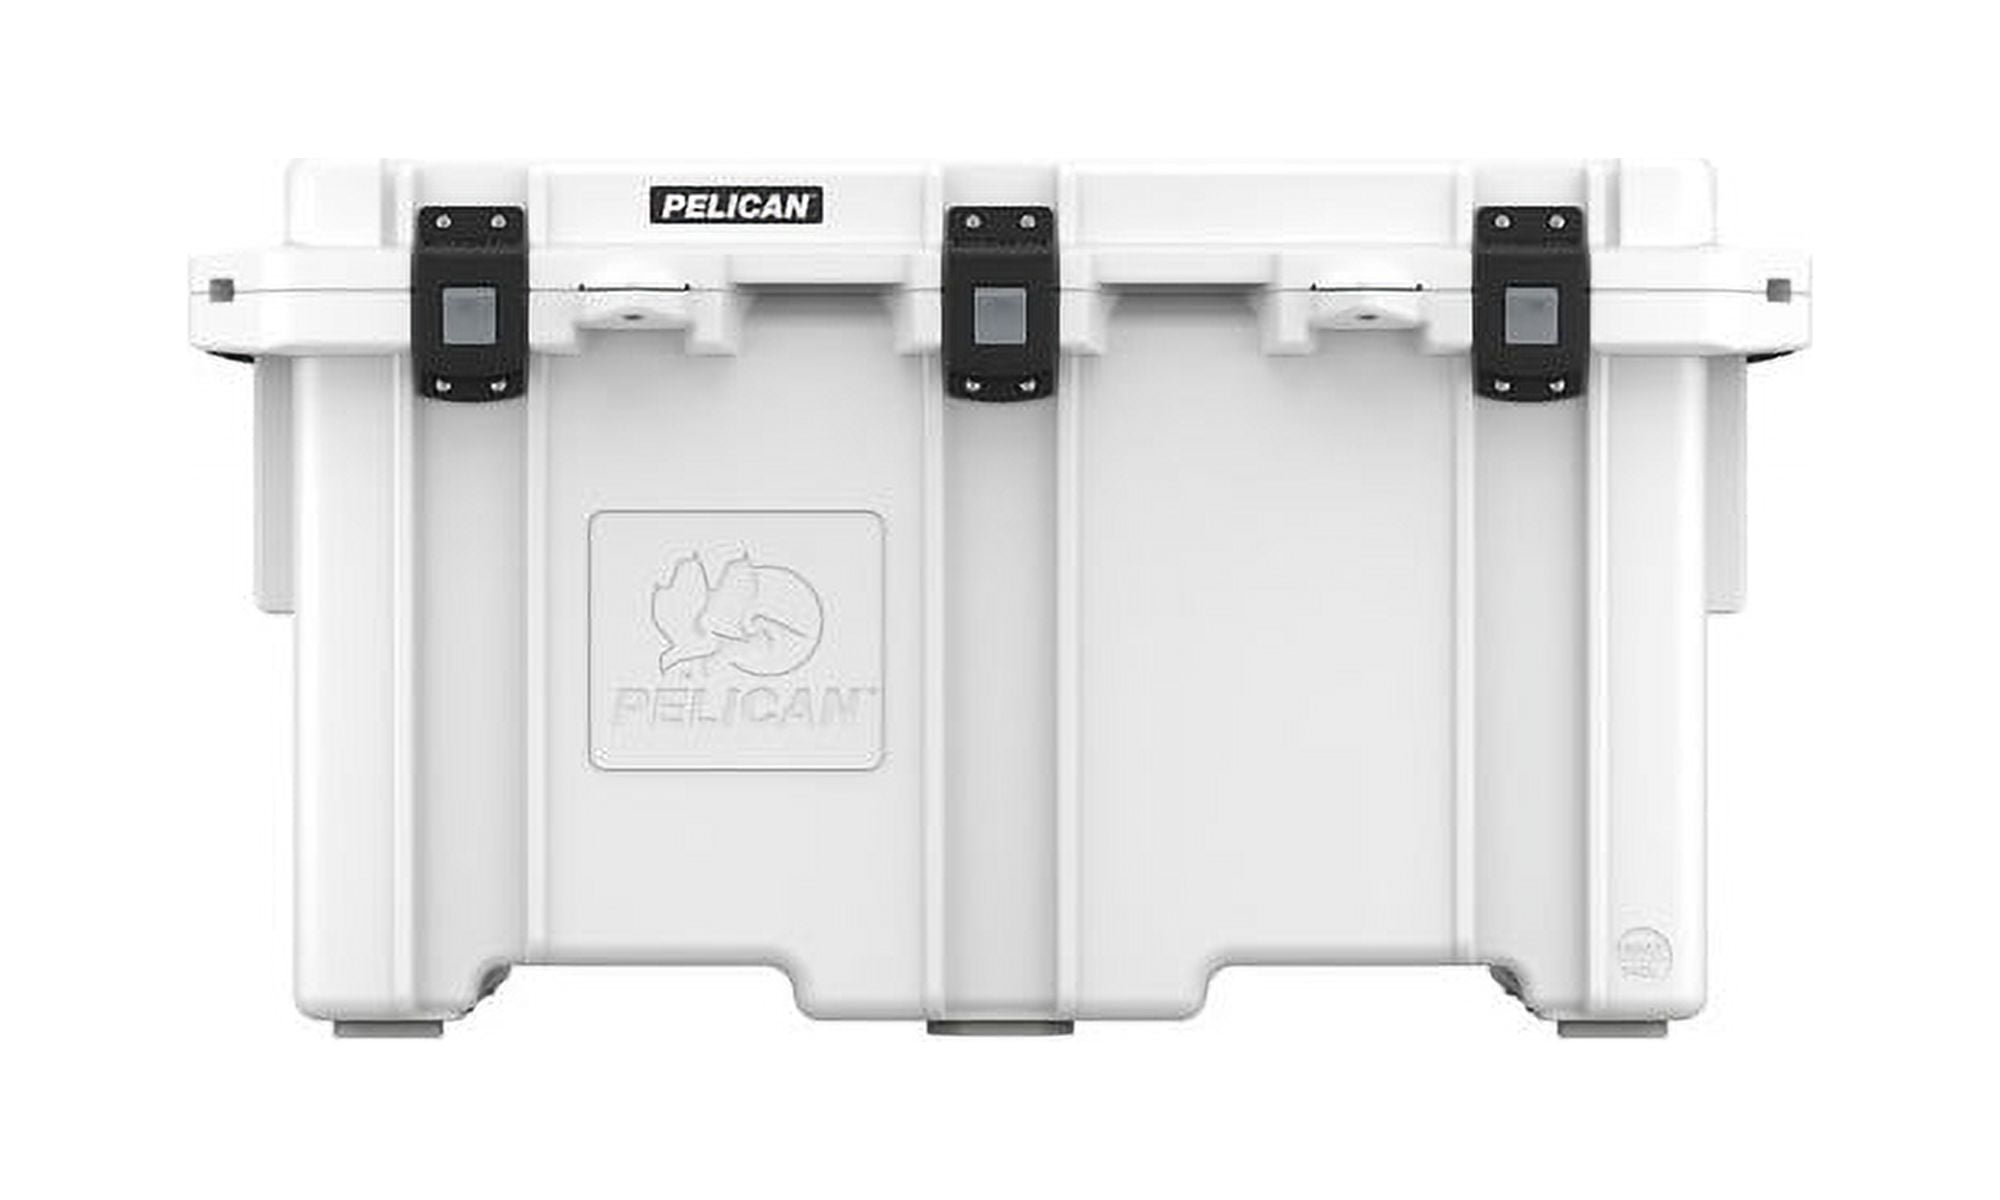 Pelican Elite Coolers Are Strong Enough to Stand Up to a Bear